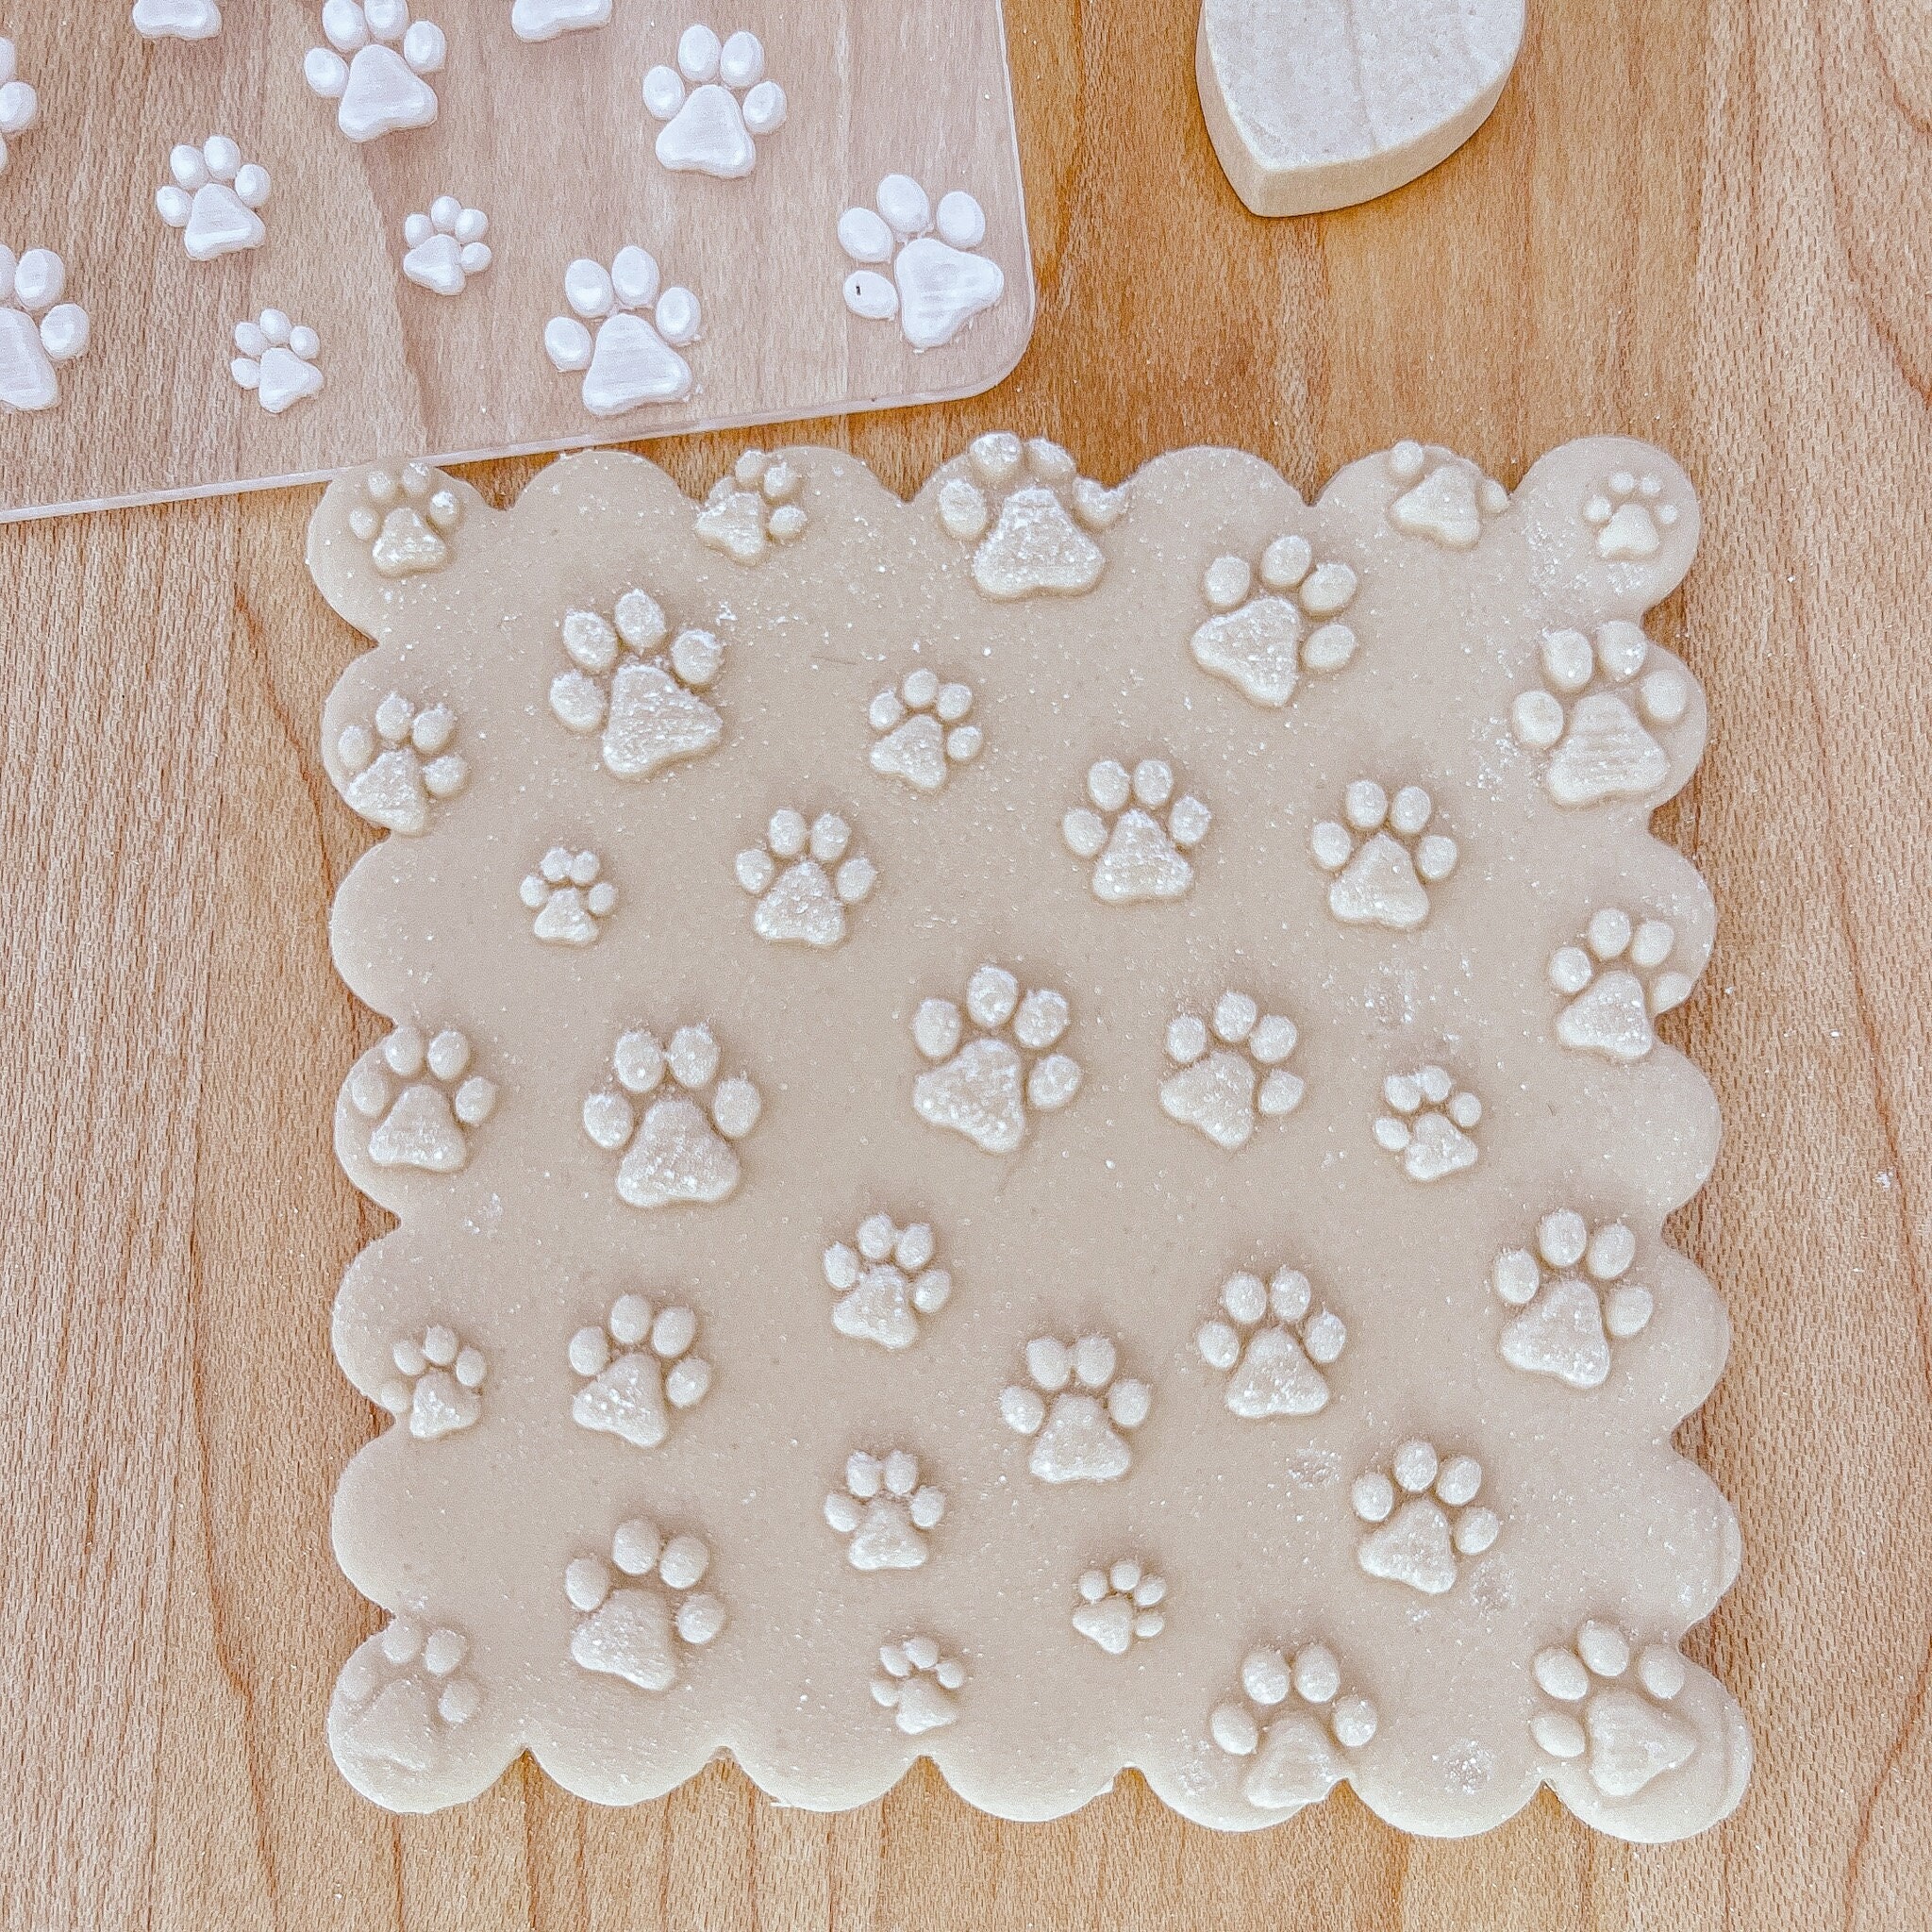 Paw Print Stamp, Dog Paw, Cat Paw, Personalized Pet Name Stamp